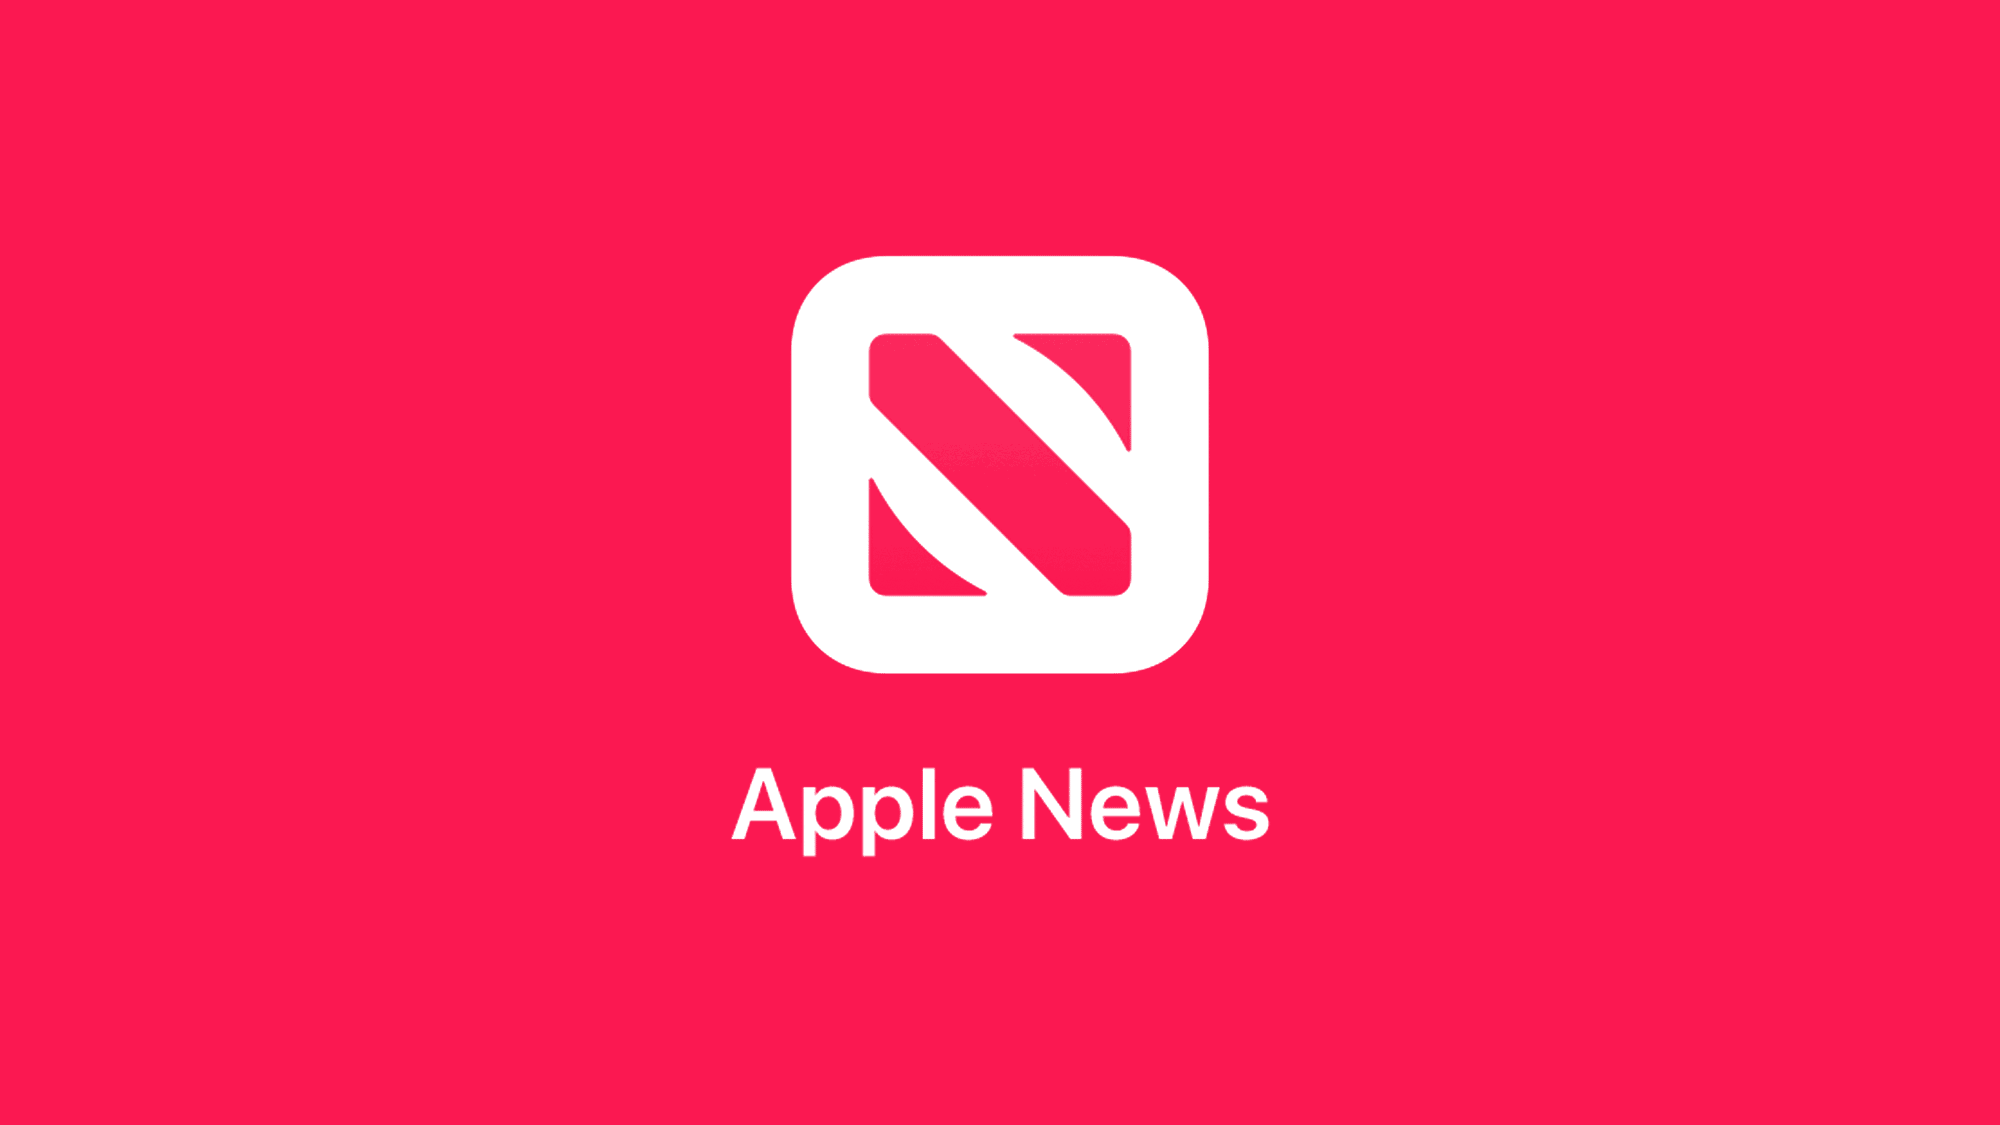 How To Submit Your Blog To Apple News - Submit To Apple News Tutorial